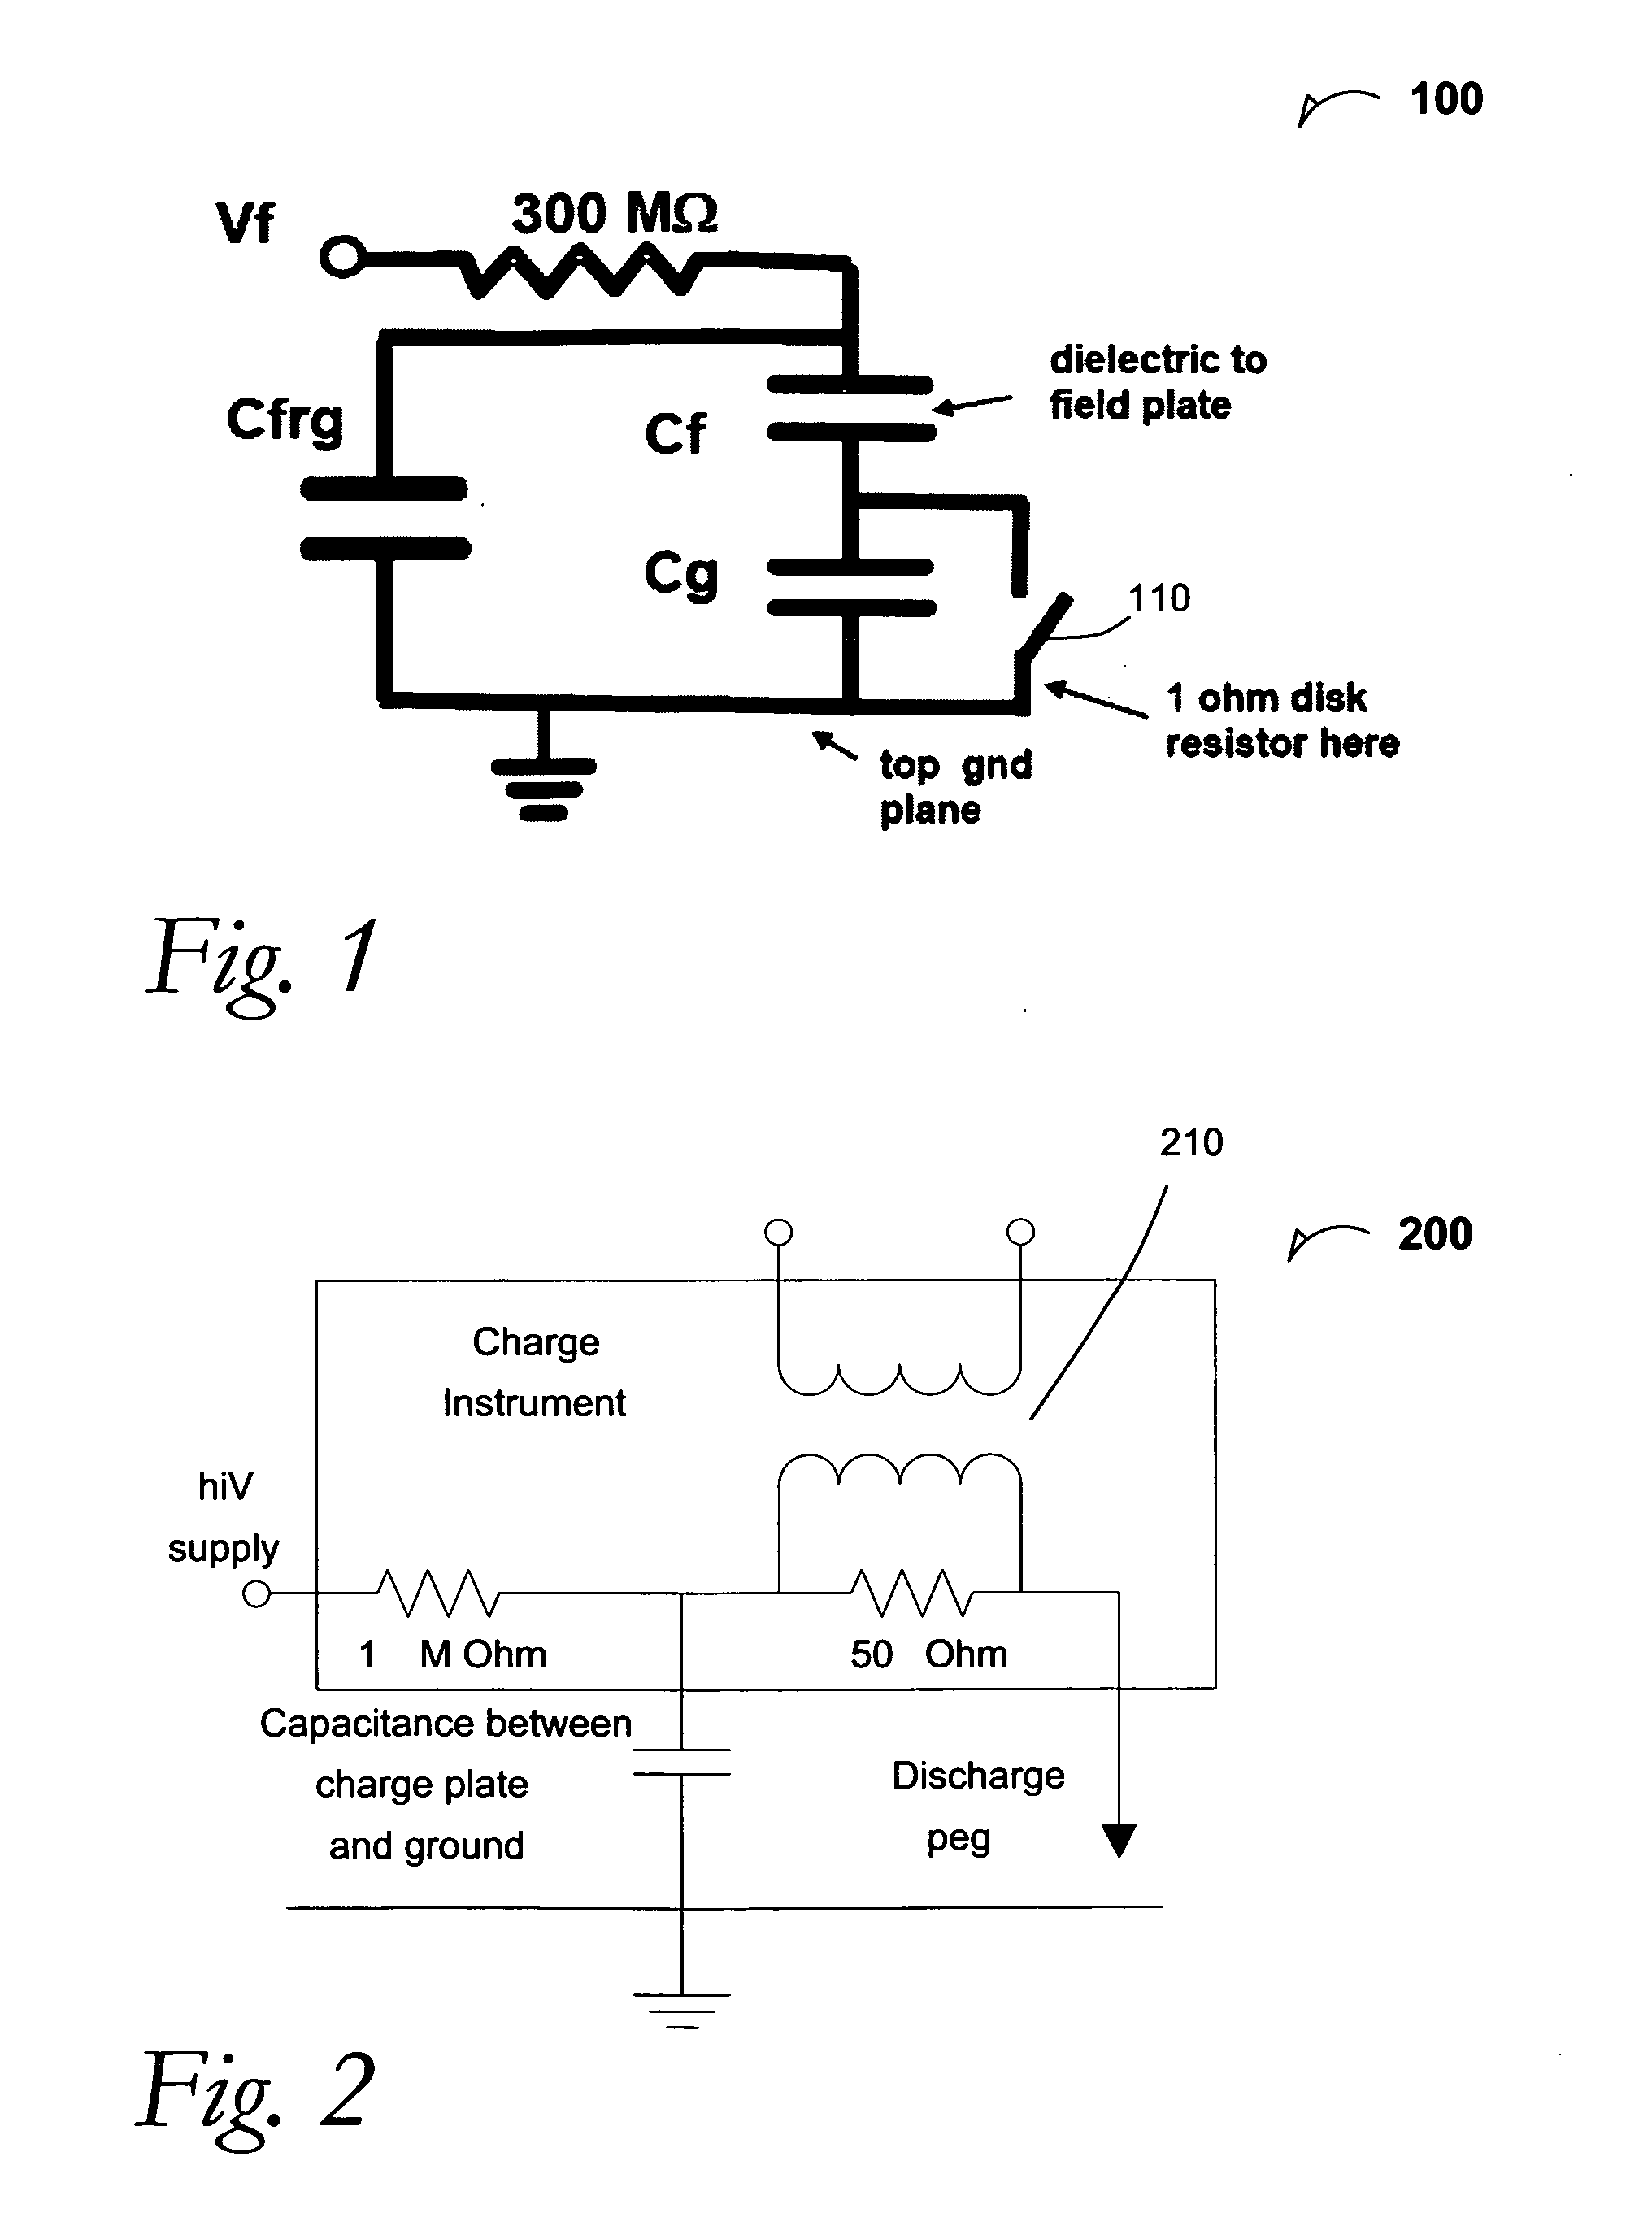 Water-level charged device model for electrostatic discharge test methods, and apparatus using same